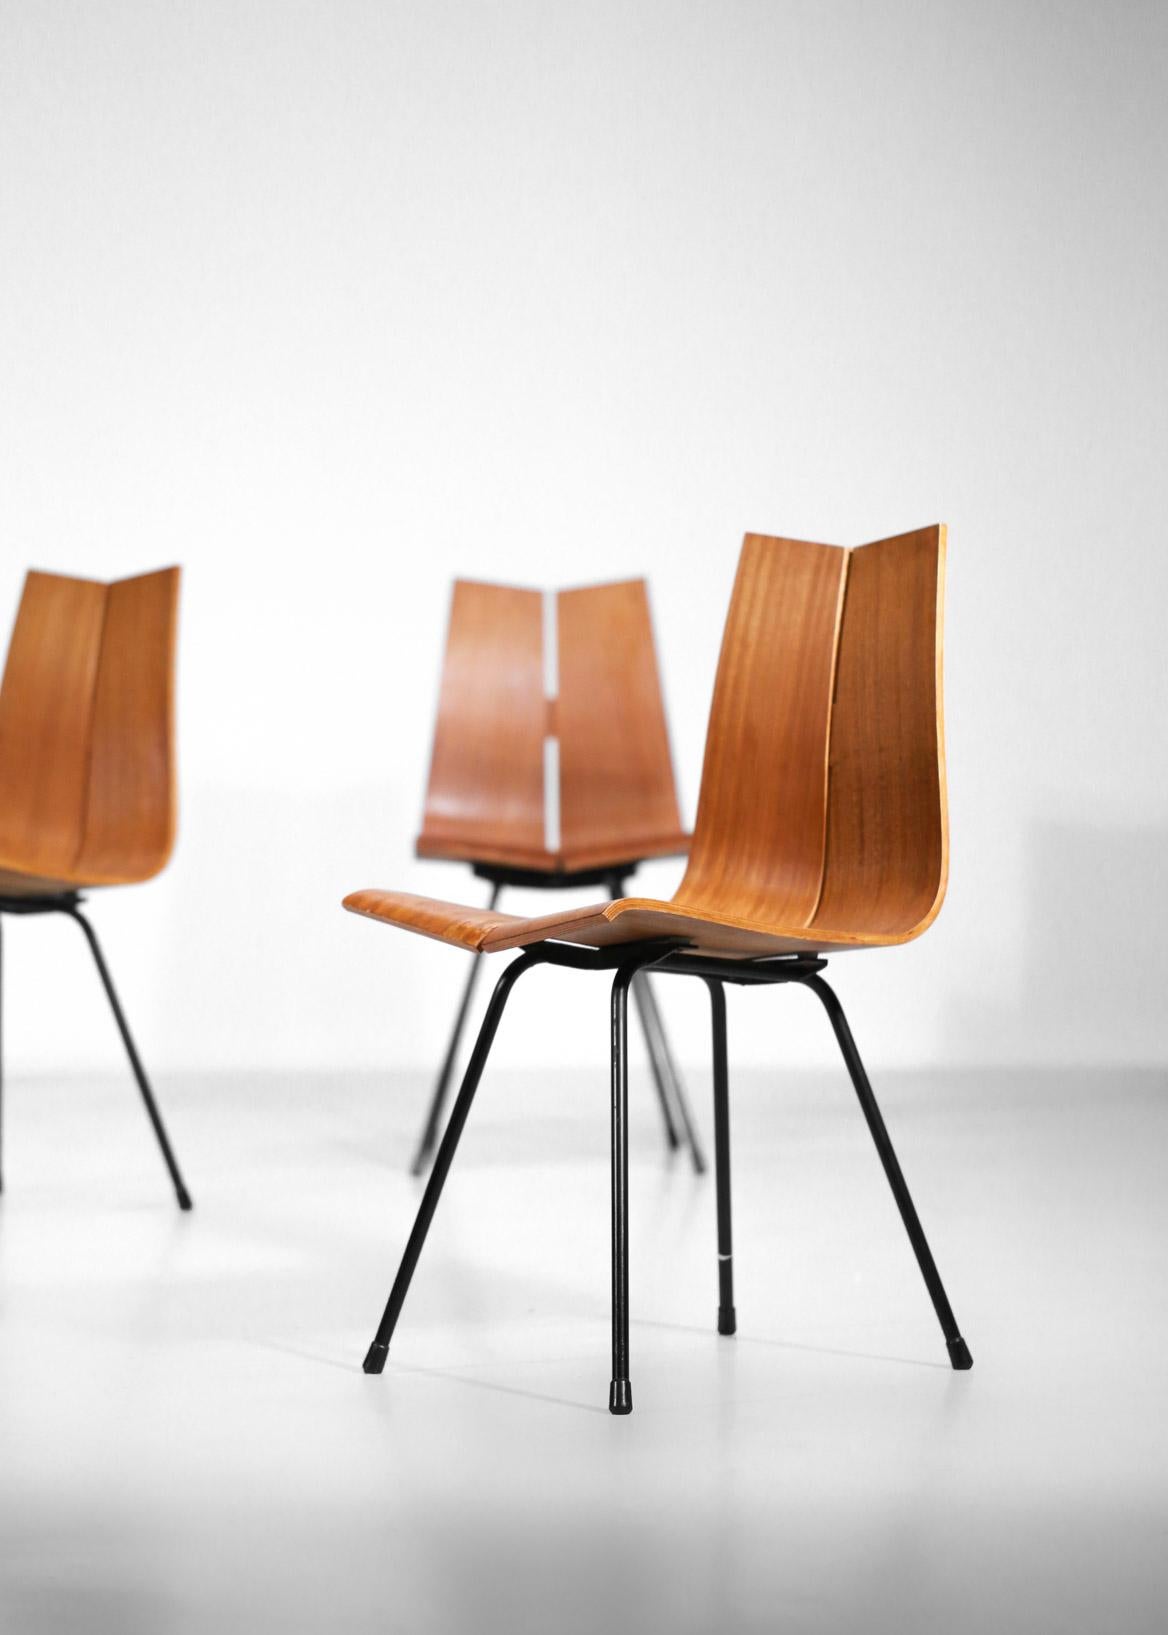 Set of six GA chairs designed by Swiss designer Hans Bellmann in the 1950s for Horgen Glarus.
Black lacquered tubular steel legs and thermoformed plywood seats. 
Fully restored, some veneer grafts (see on the pictures).